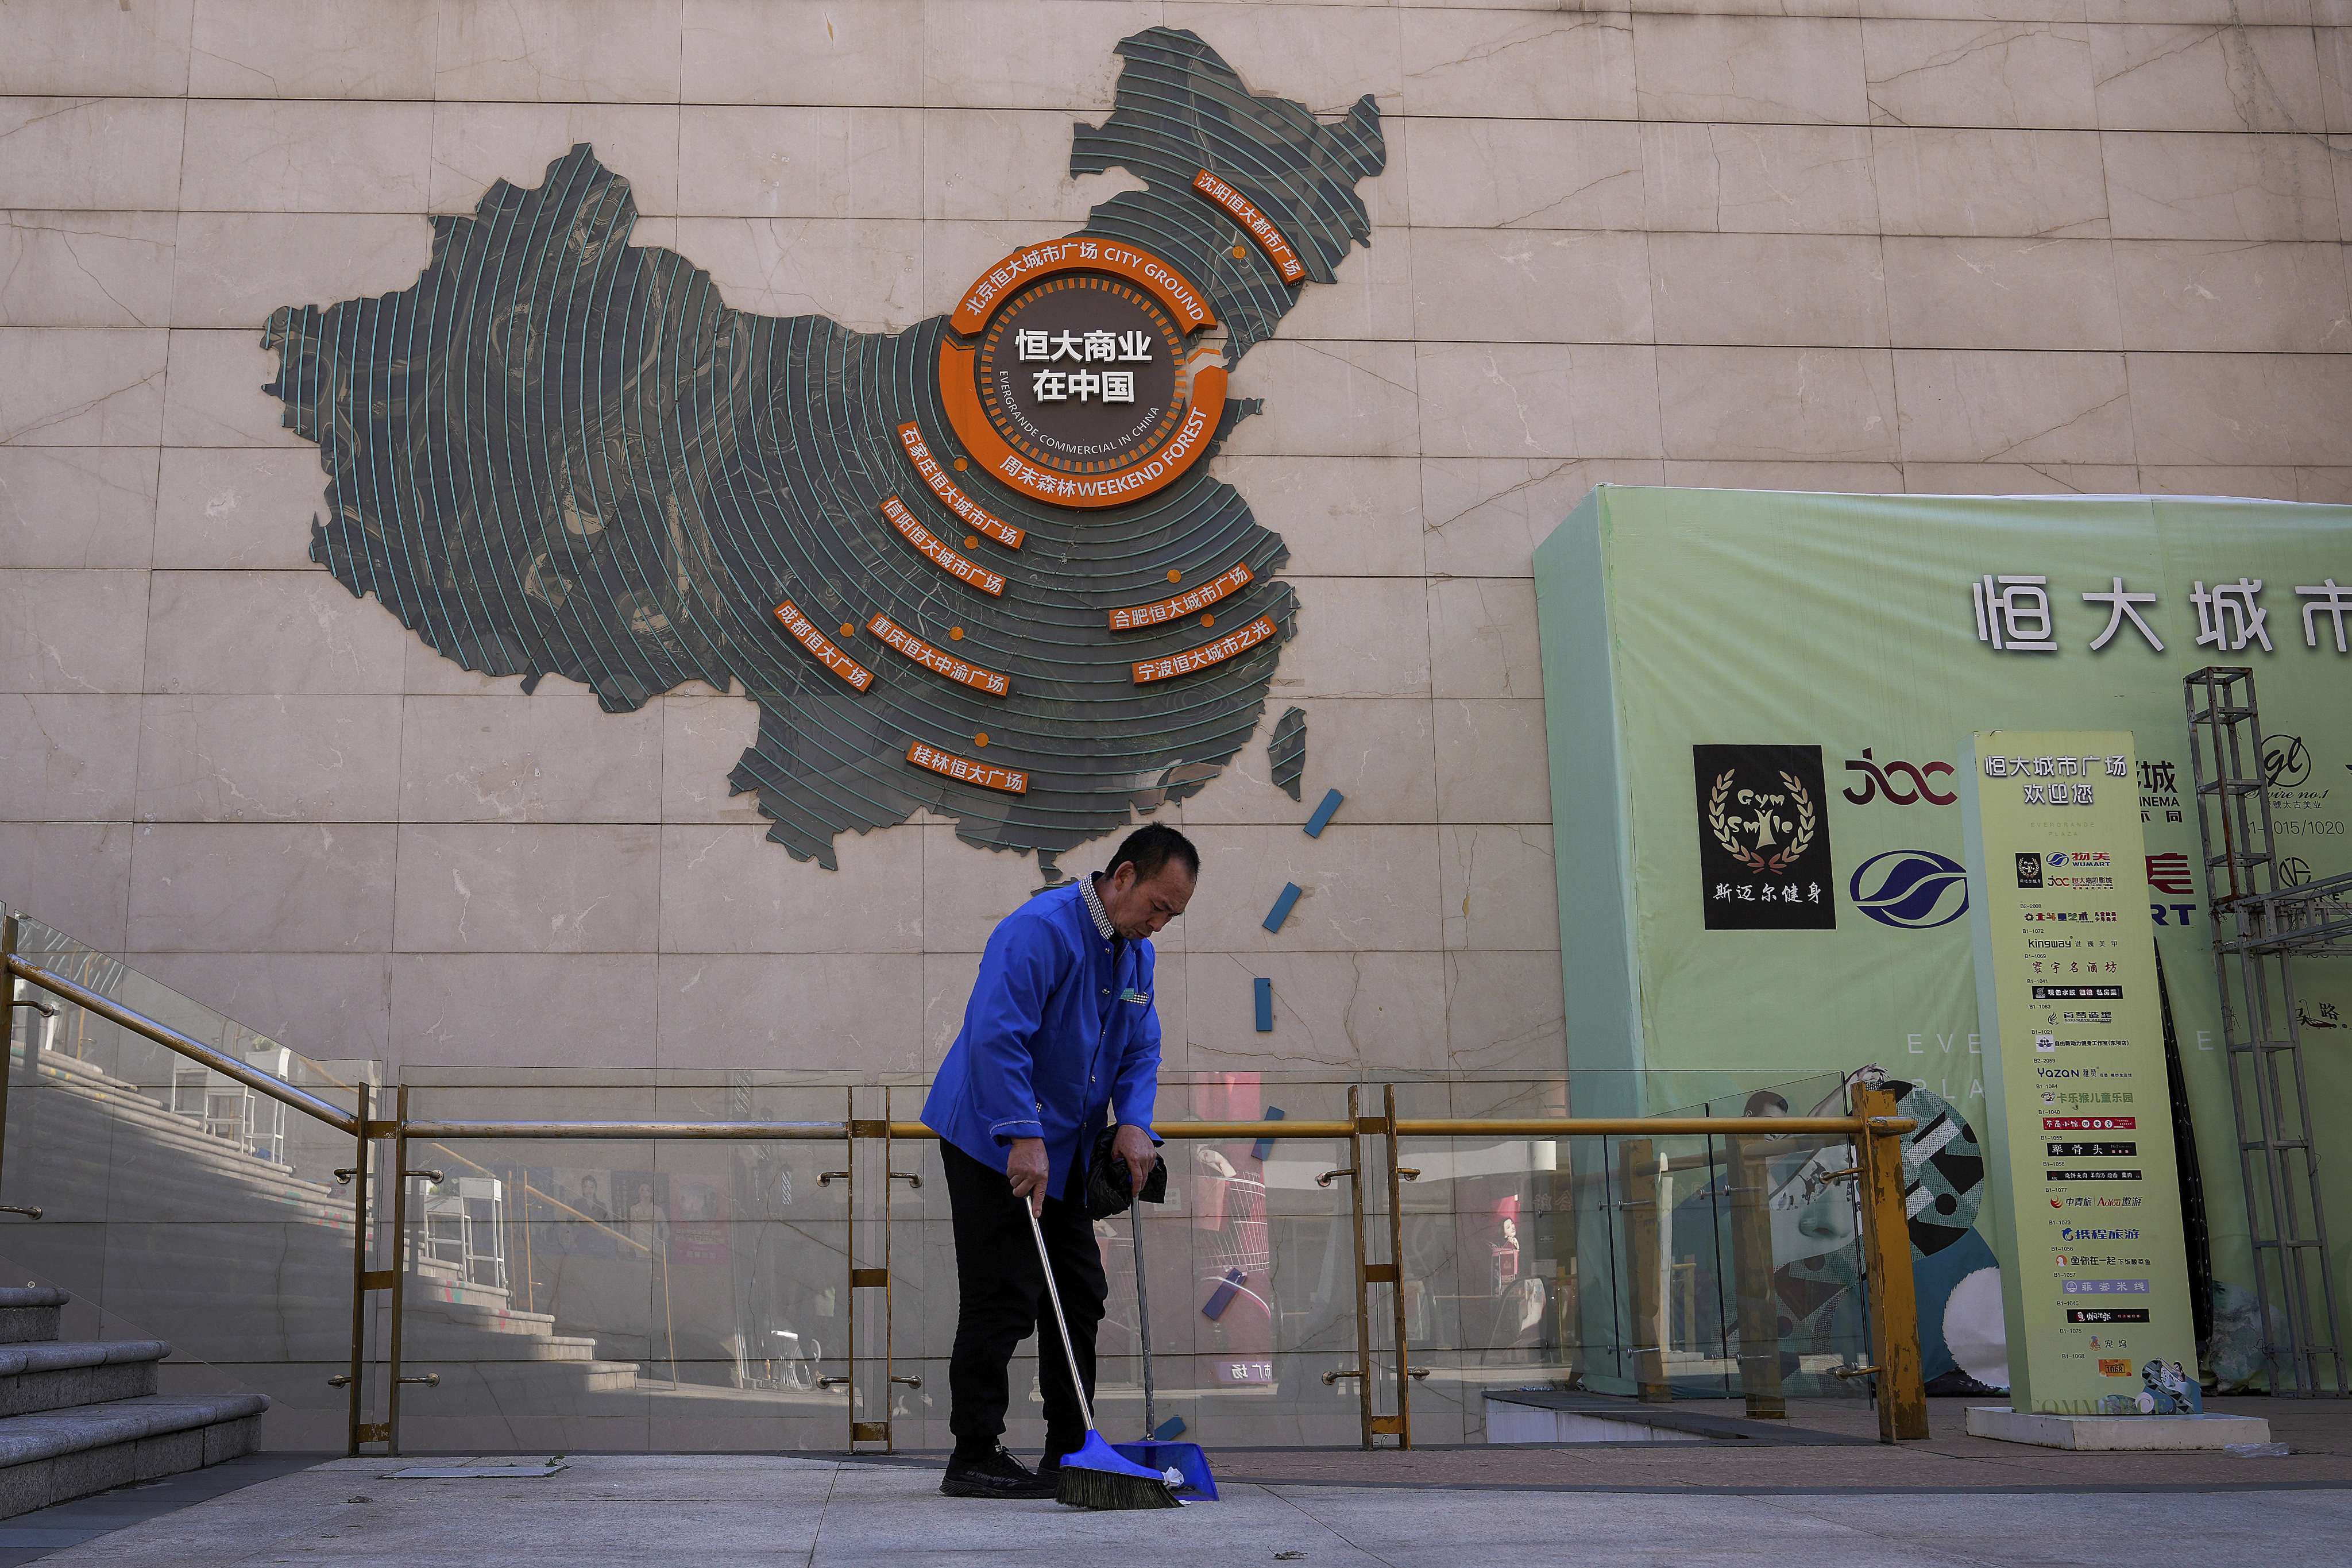 A cleaner sweeps near a map showing Evergrande development projects in China on a wall in an Evergrande city plaza in Beijing on September 21, 2021. Photo: AP